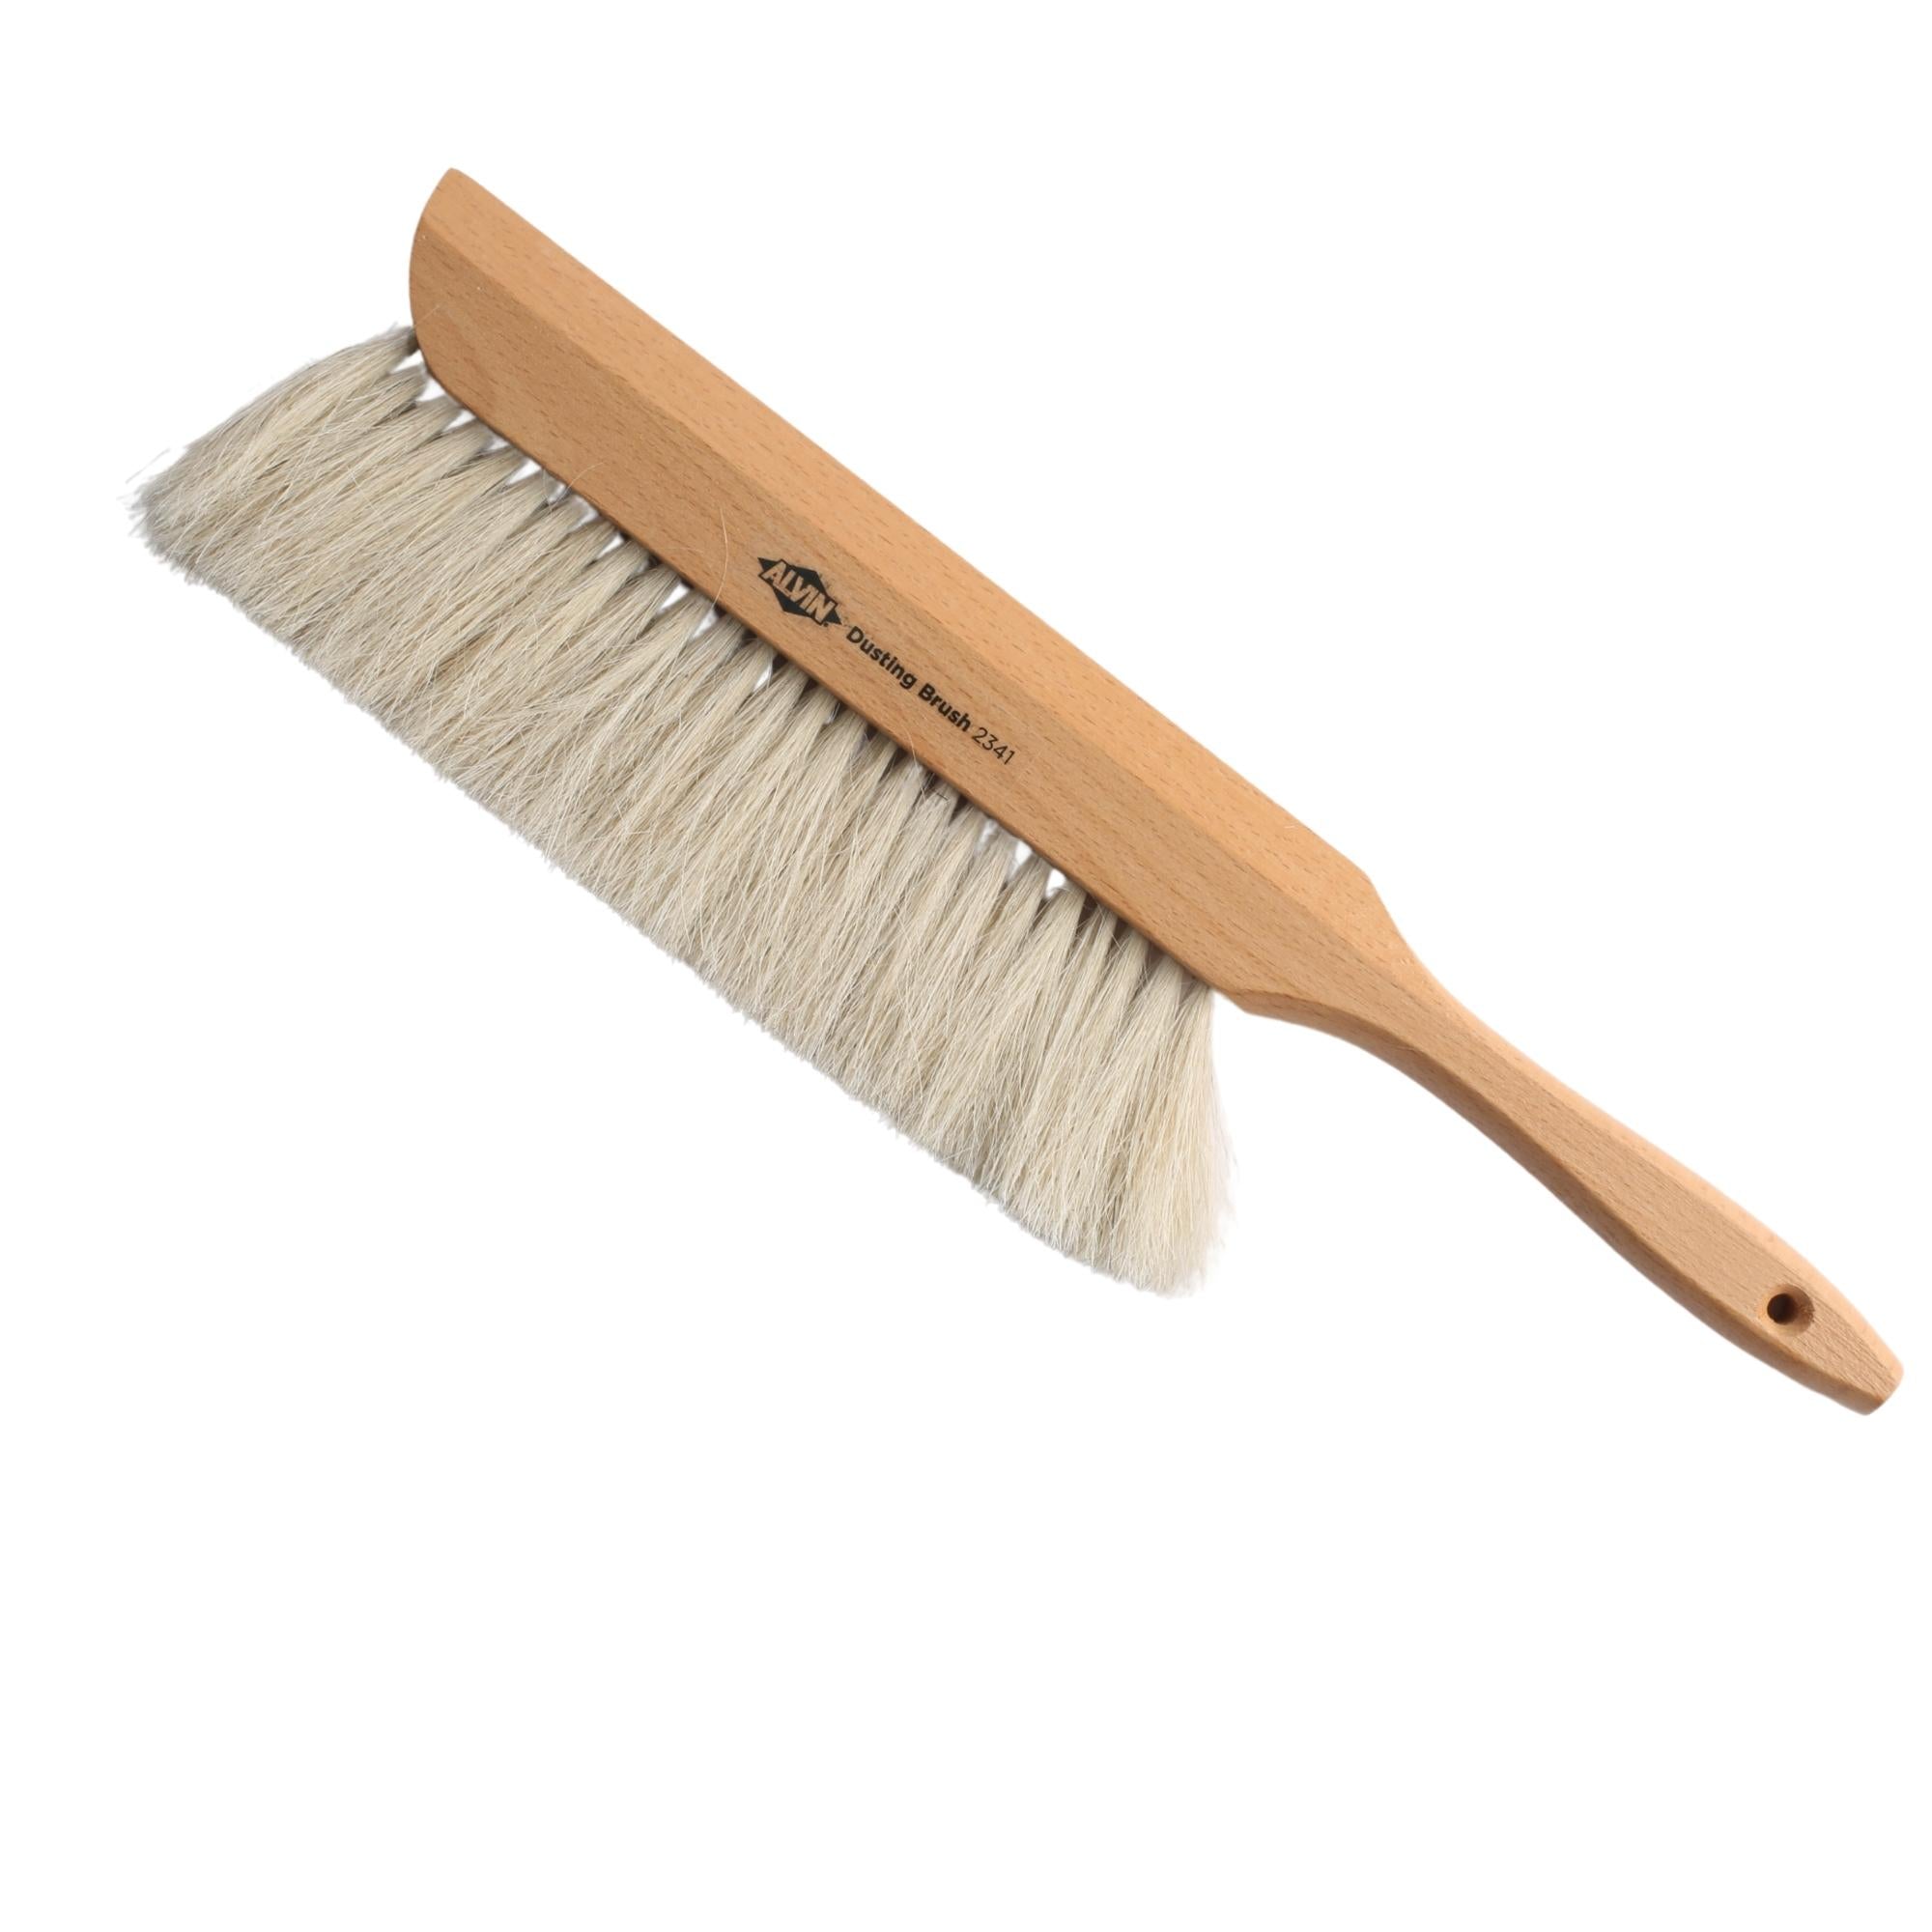 Soft Cleaning Brush Counter Duster Hair Drafting Brush for